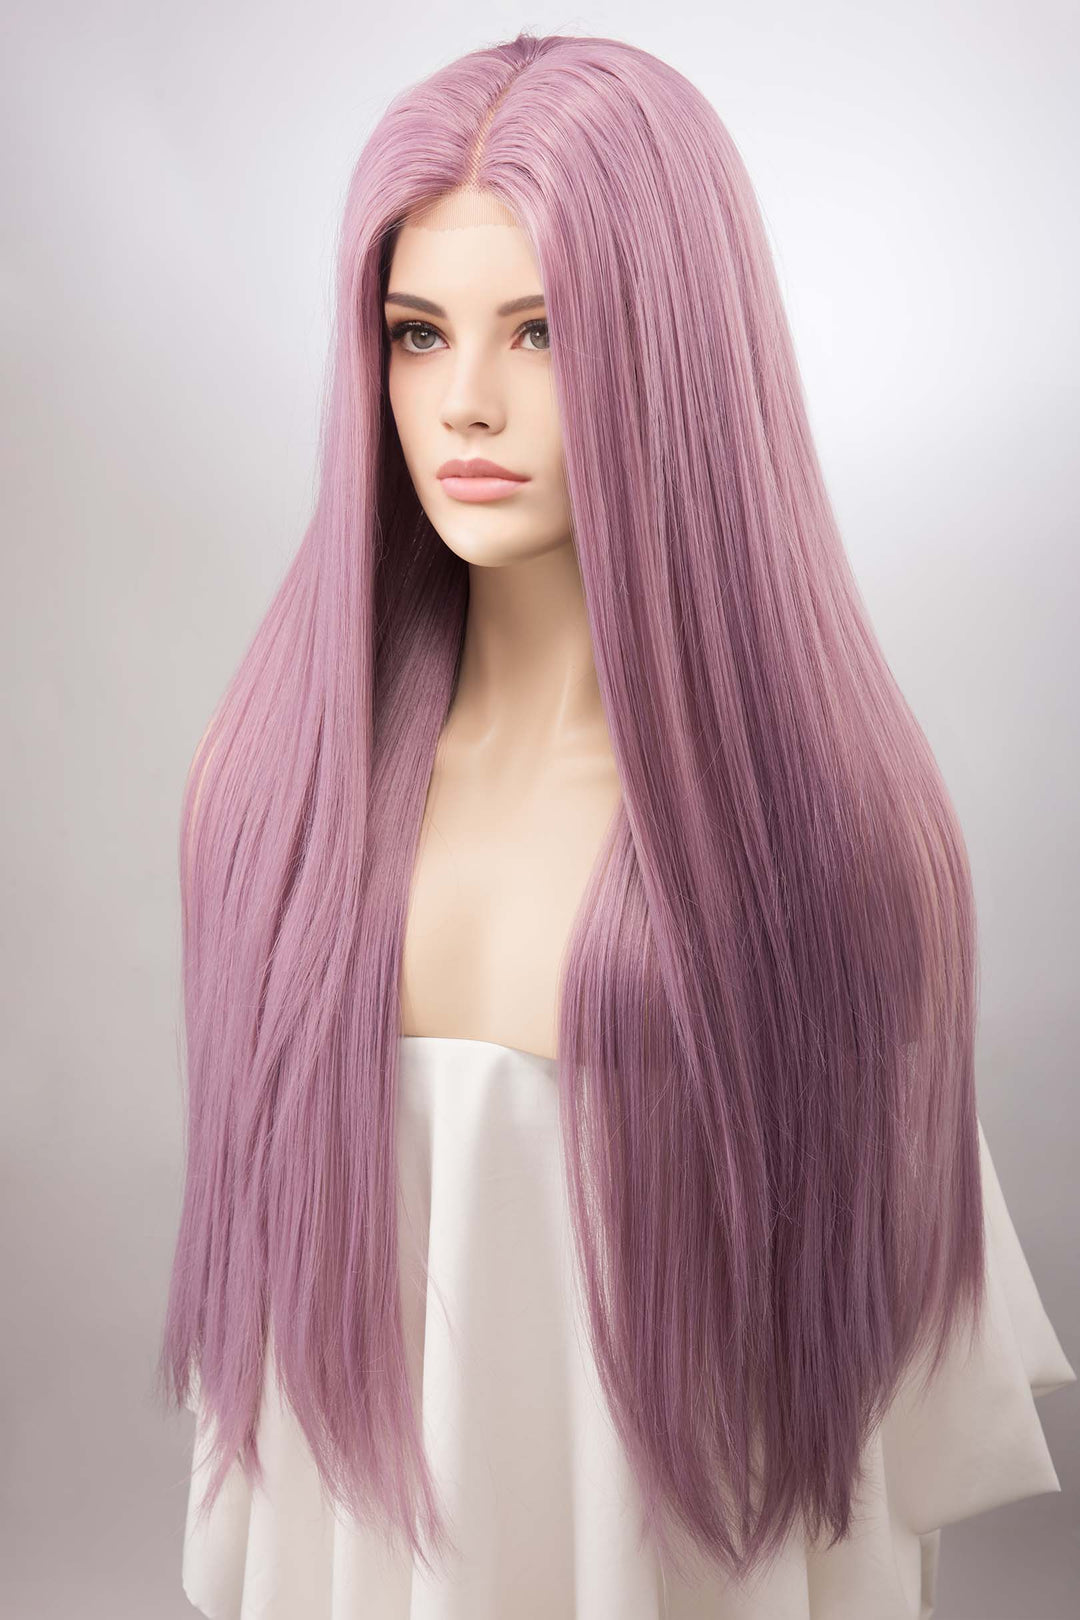 Lilac Lace Front Wig Lavender Color Hair Cosplay Wig Light Purple Straight Wig Drag Queen Wig Halloween Costume Wig Kylin